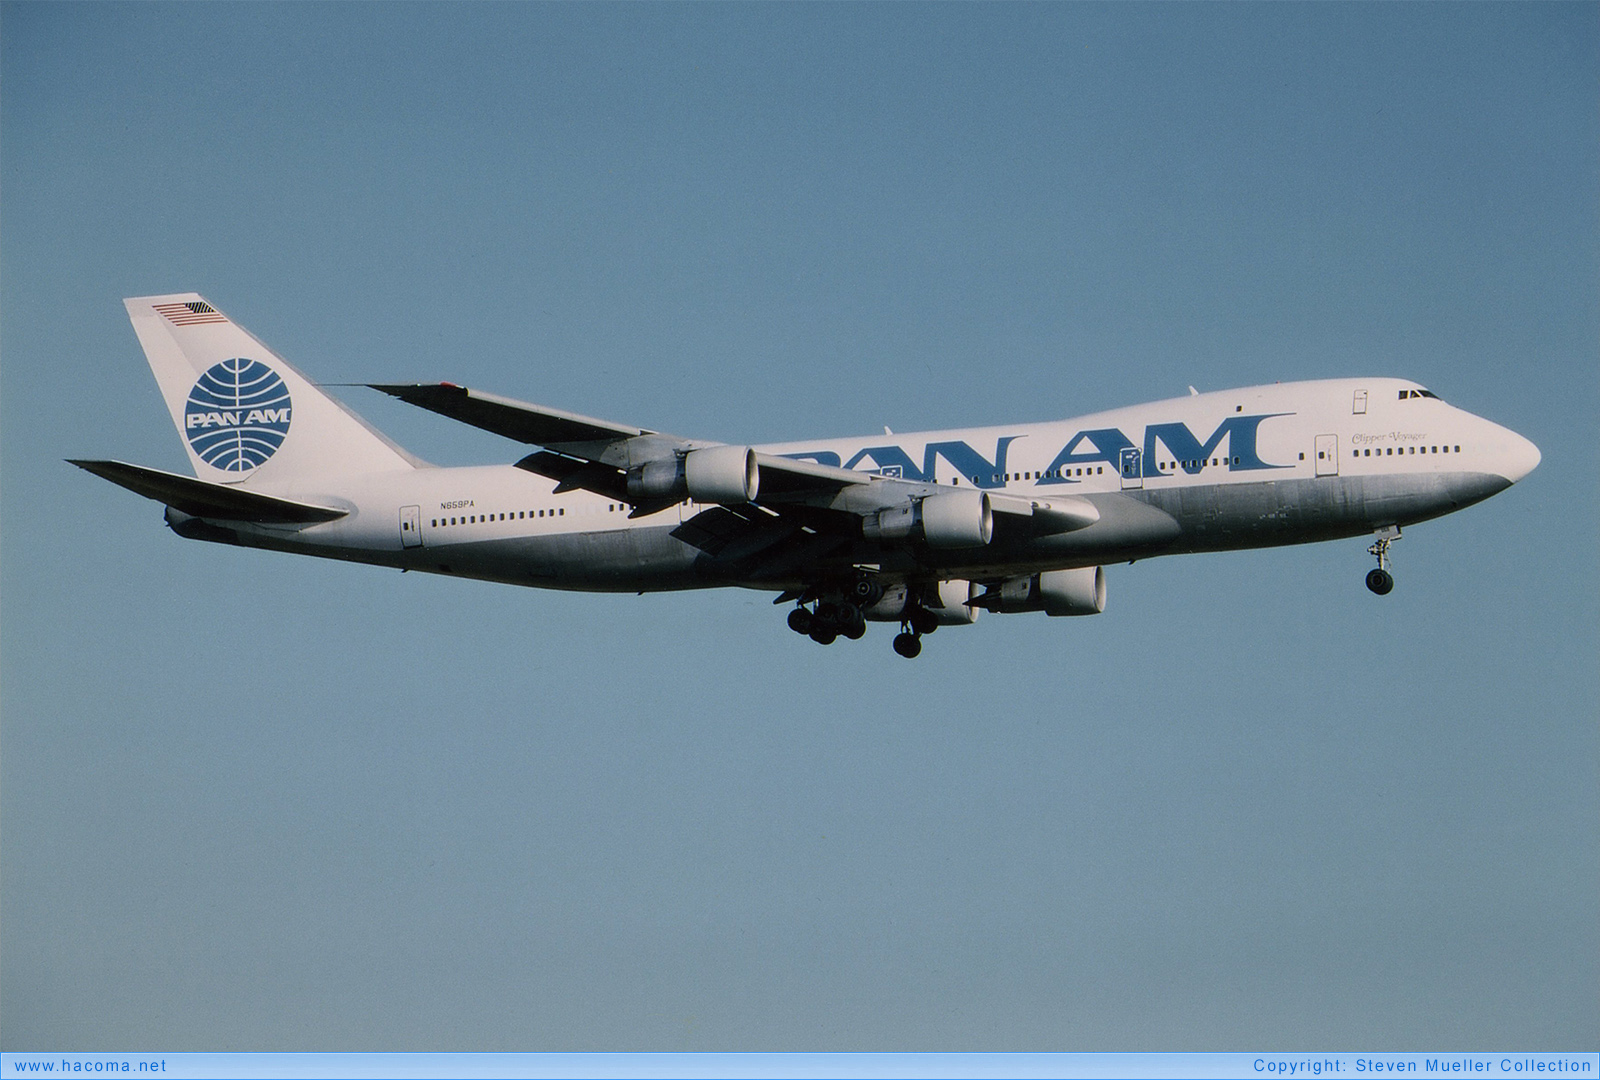 Photo of N659PA - Pan Am Clipper Plymouth Rock  / Romance of the Seas / Plymouth Rock / Voyager - Frankfurt International Airport - 1990